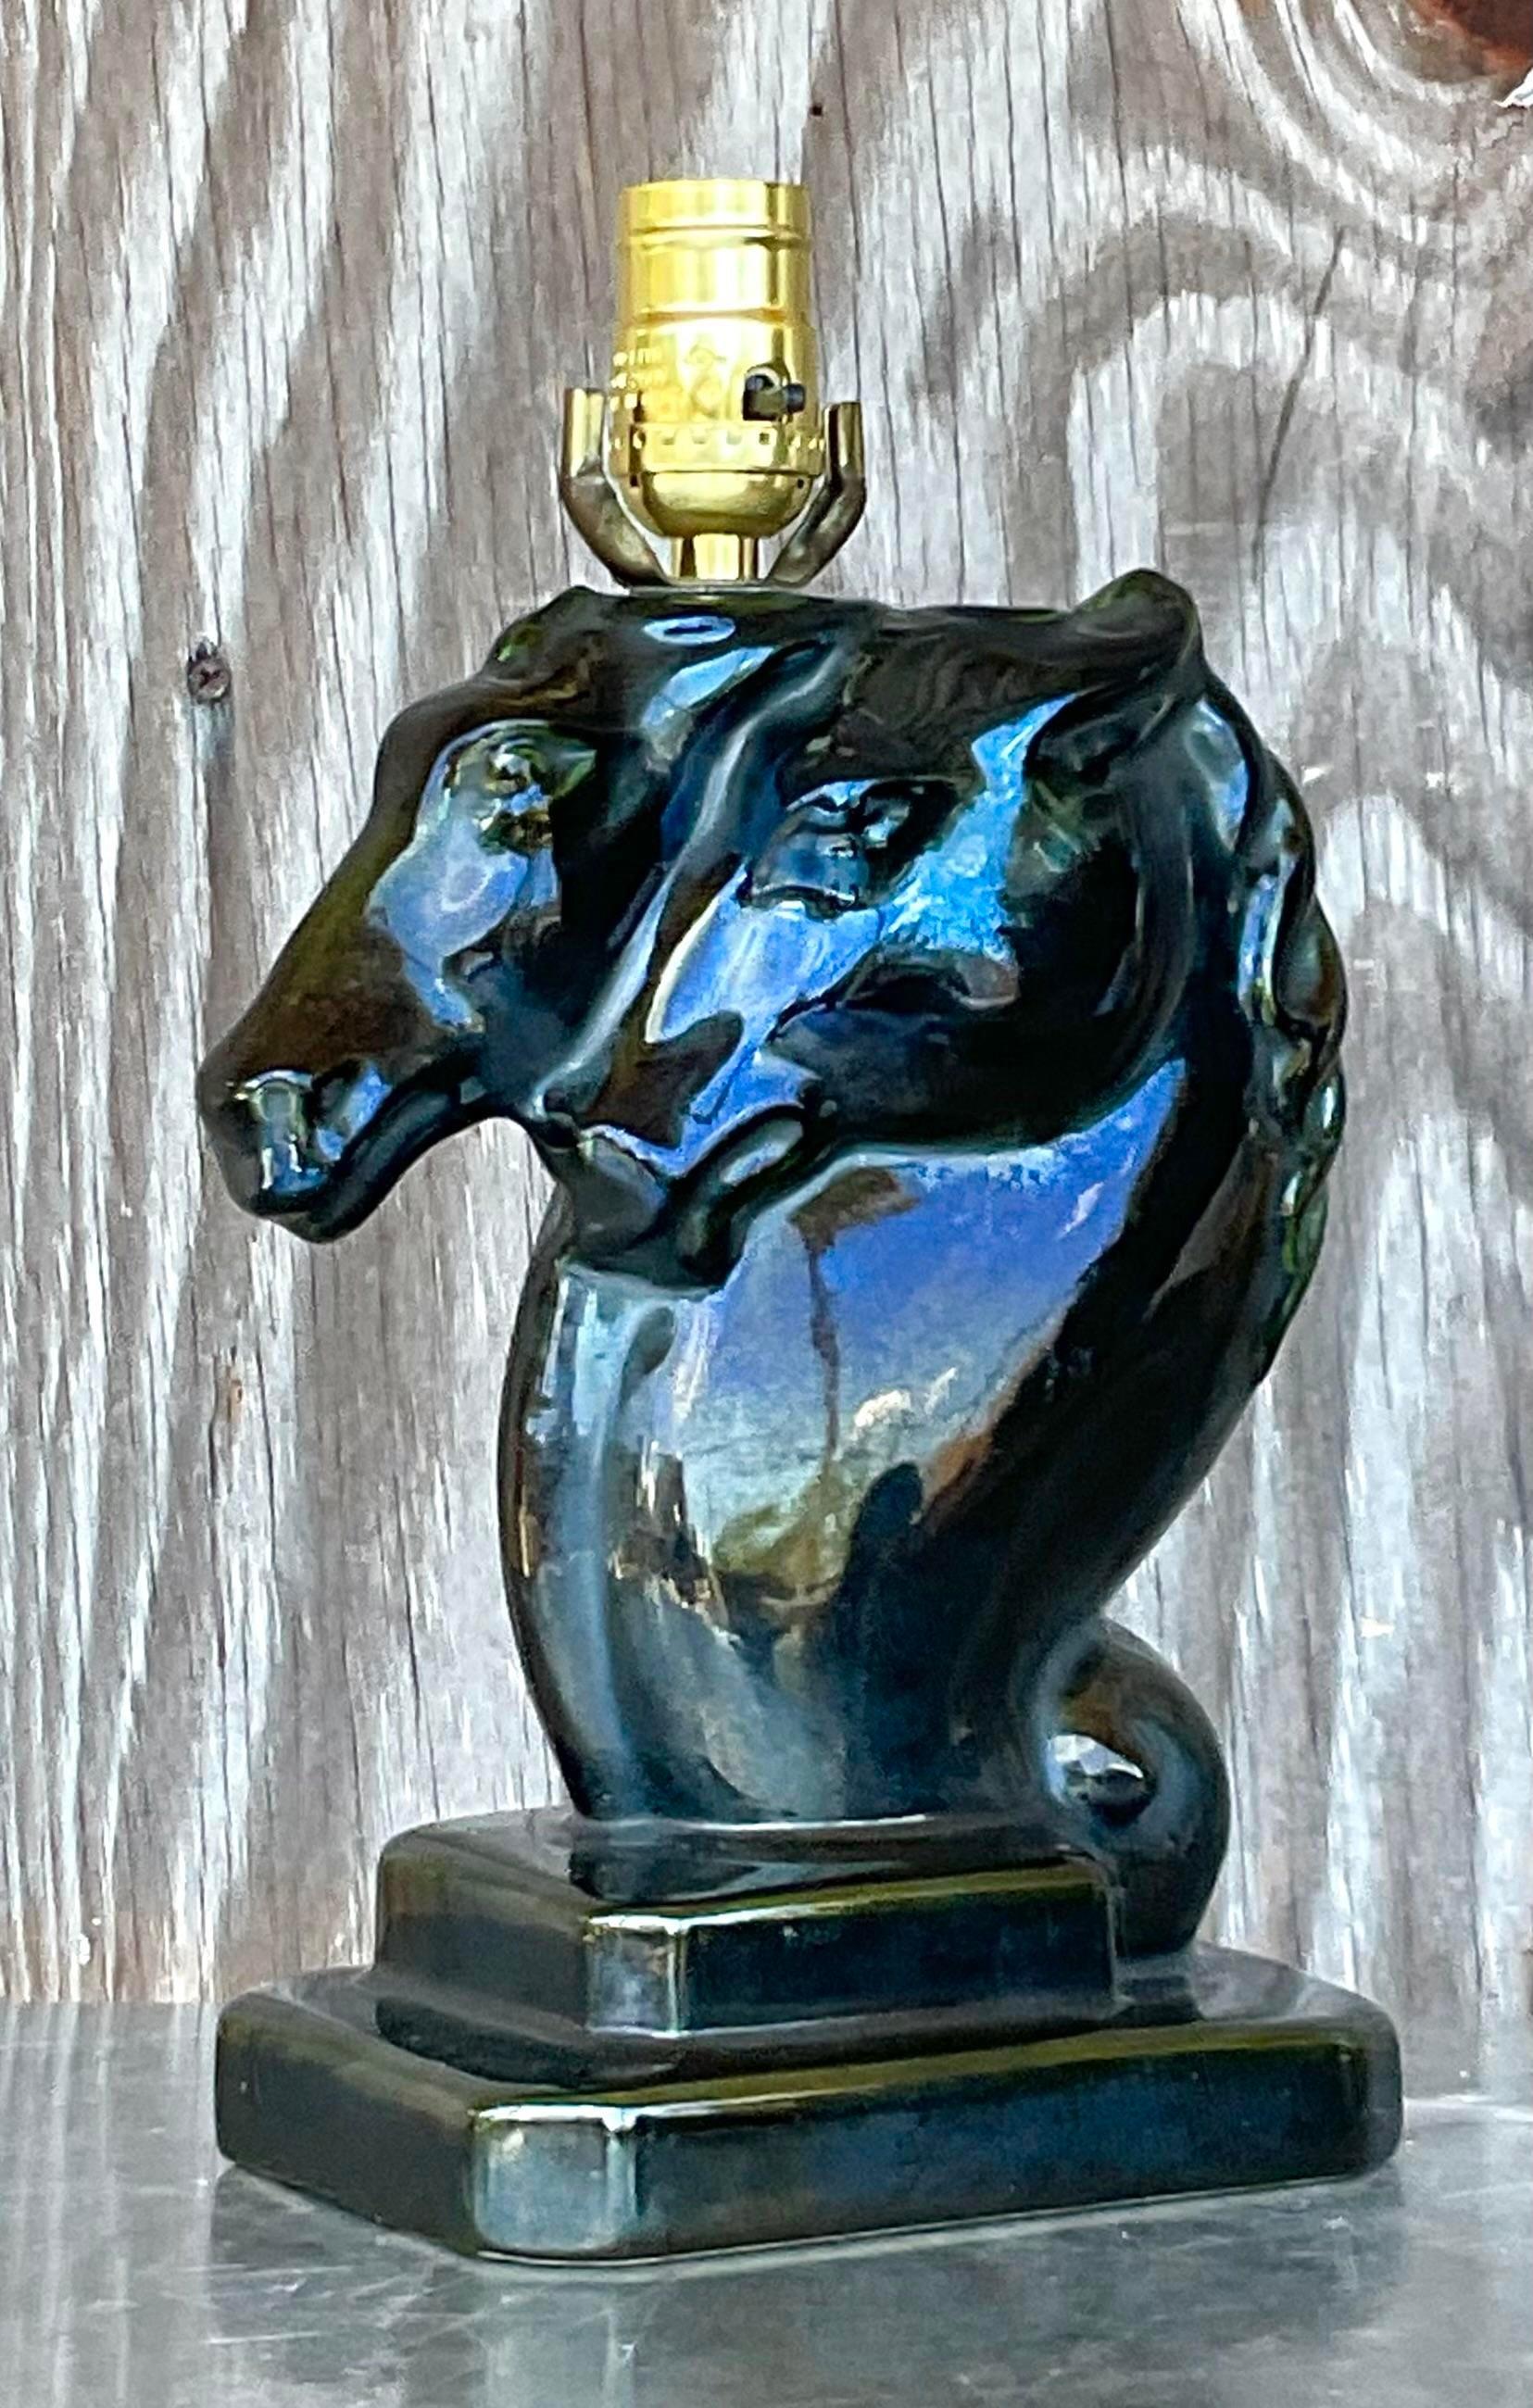 A fabulous vintage Boho table lamp. A chic double horse head with a glazed ceramic finish. Acquired from a Palm Beach estate. 